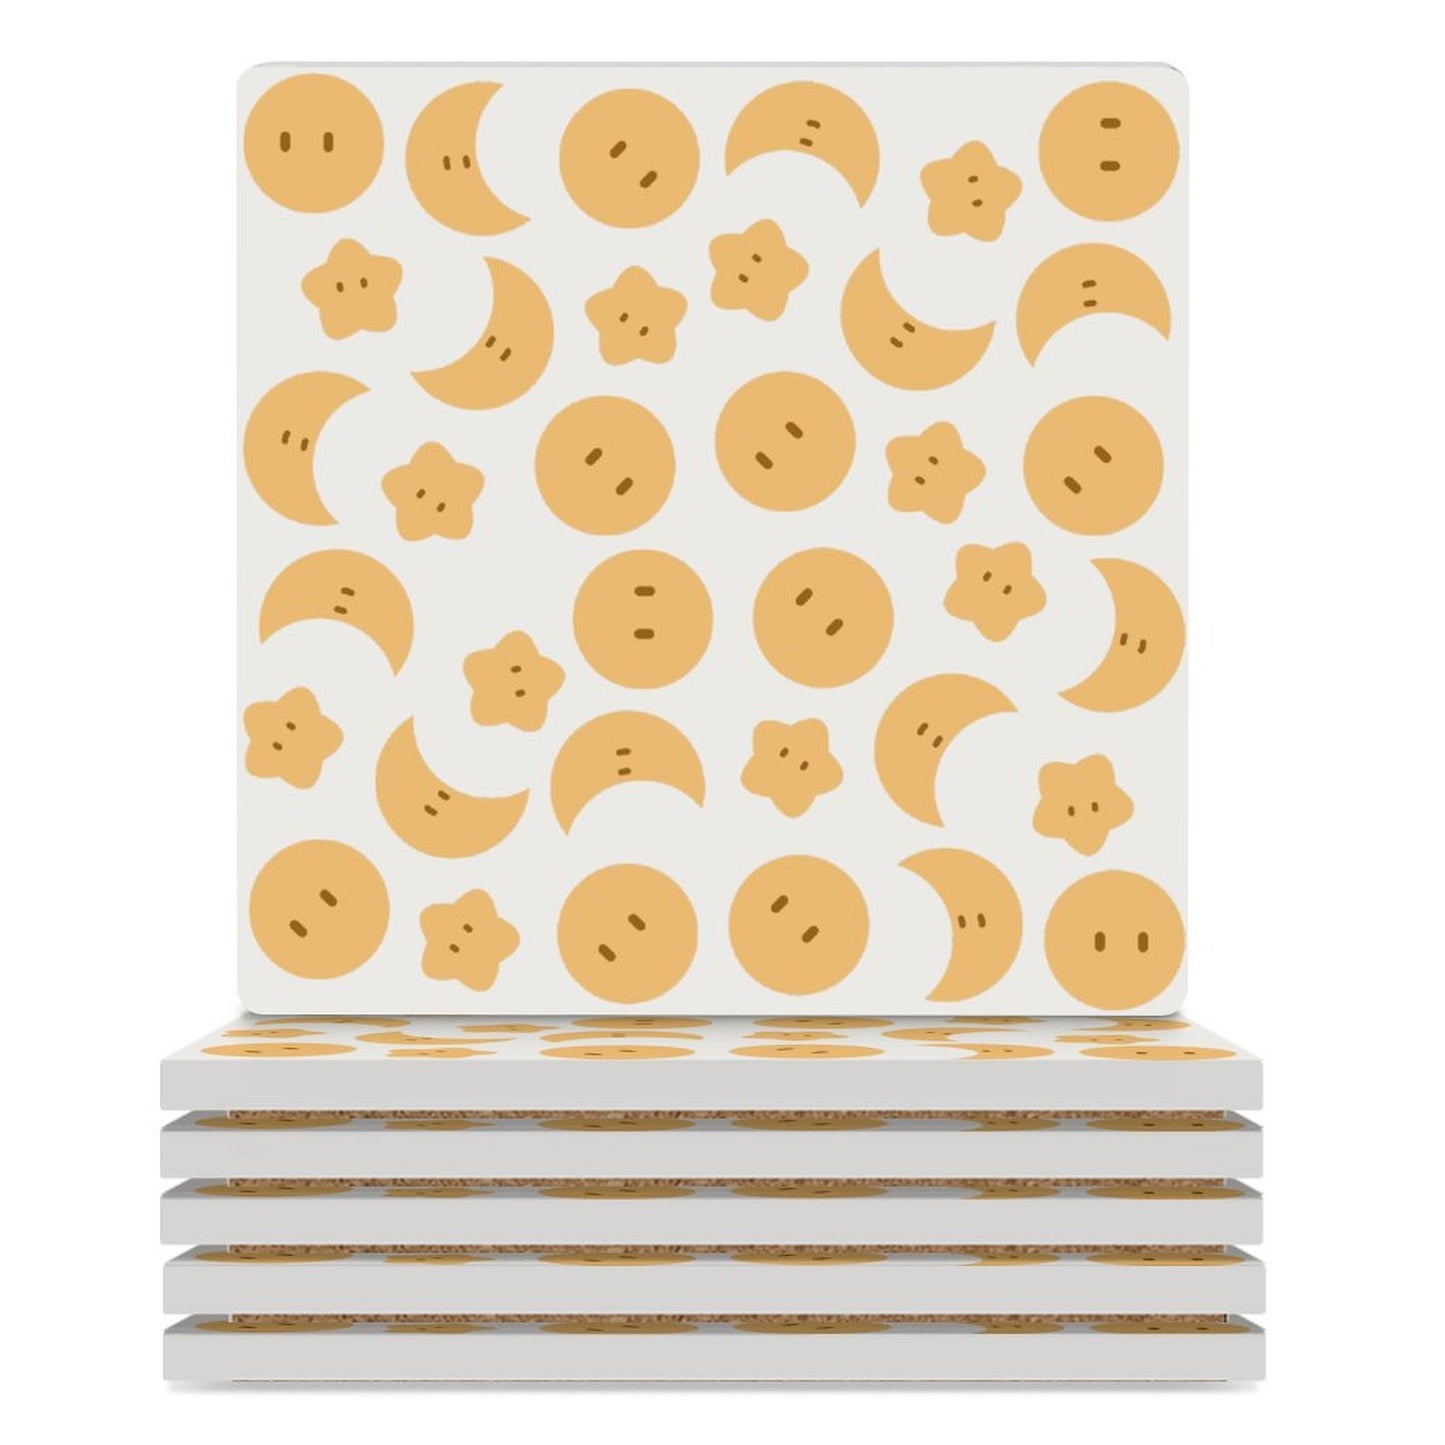 Online Customize Ceramic Coasters Square Tile Pattern Sun Star Moon Cute Yellow